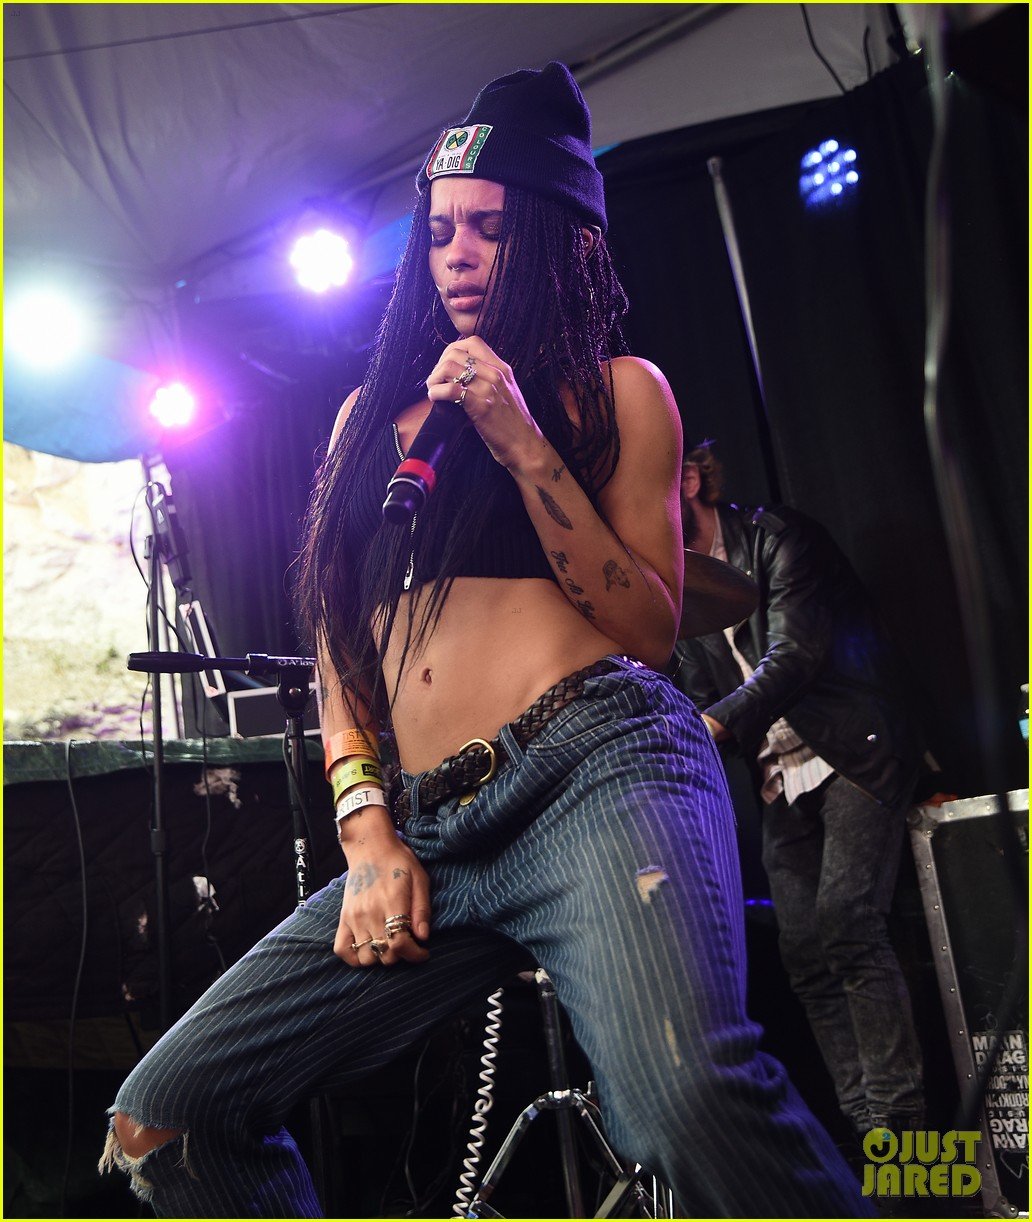 Zoe Kravitz Hits The Stage With Lolawolf At Sxsw Photo 789680 Photo Gallery Just Jared Jr